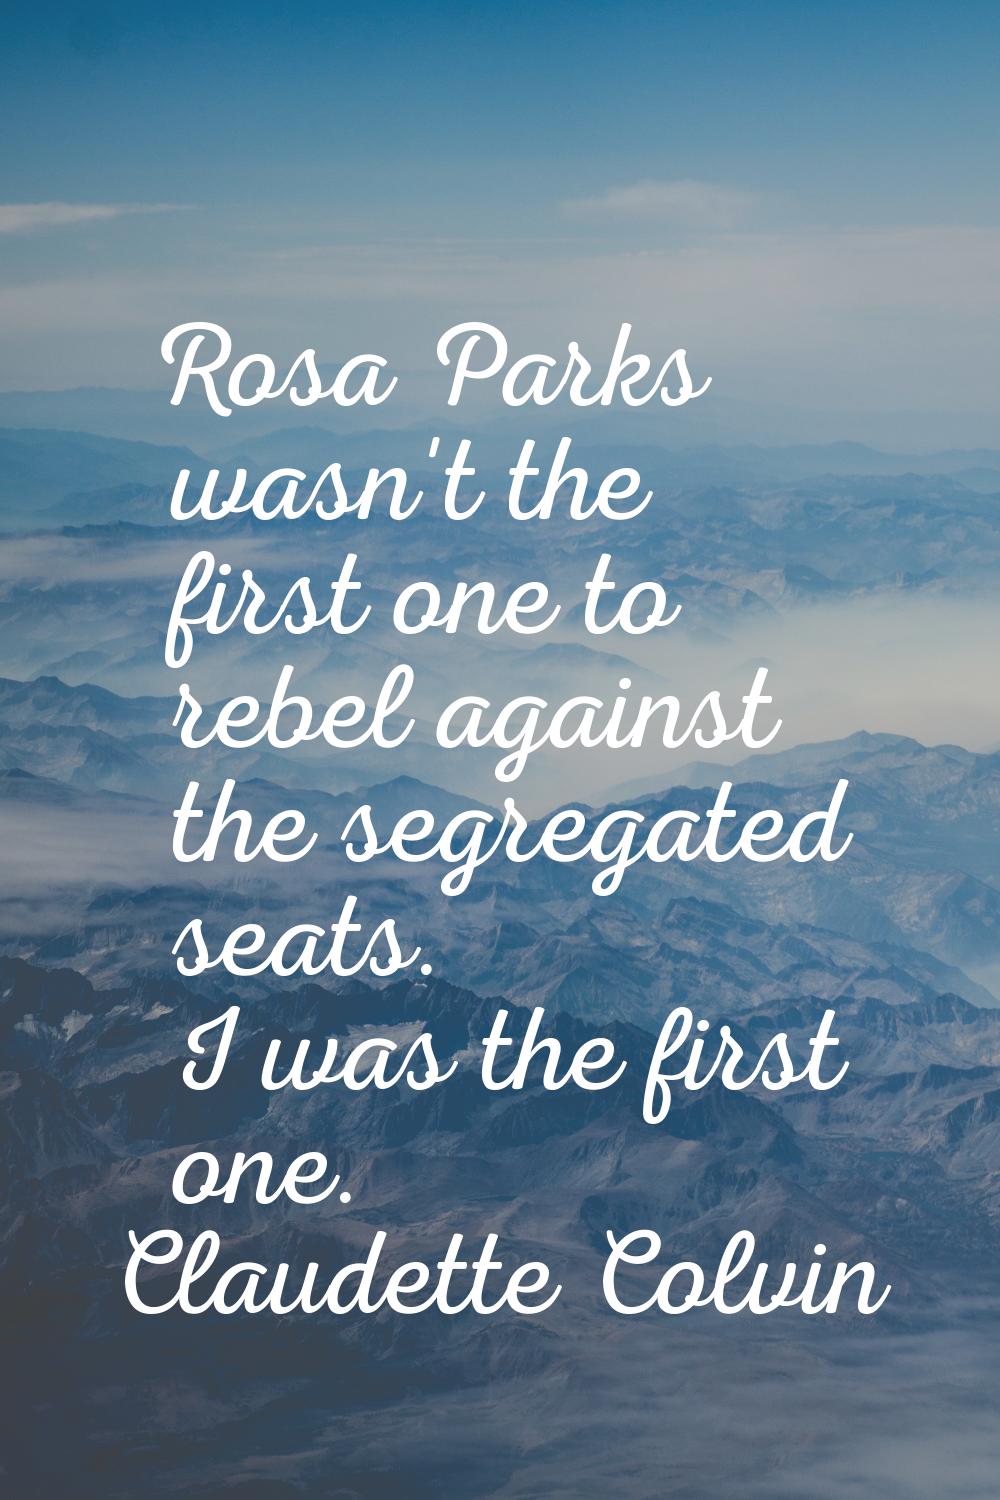 Rosa Parks wasn't the first one to rebel against the segregated seats. I was the first one.